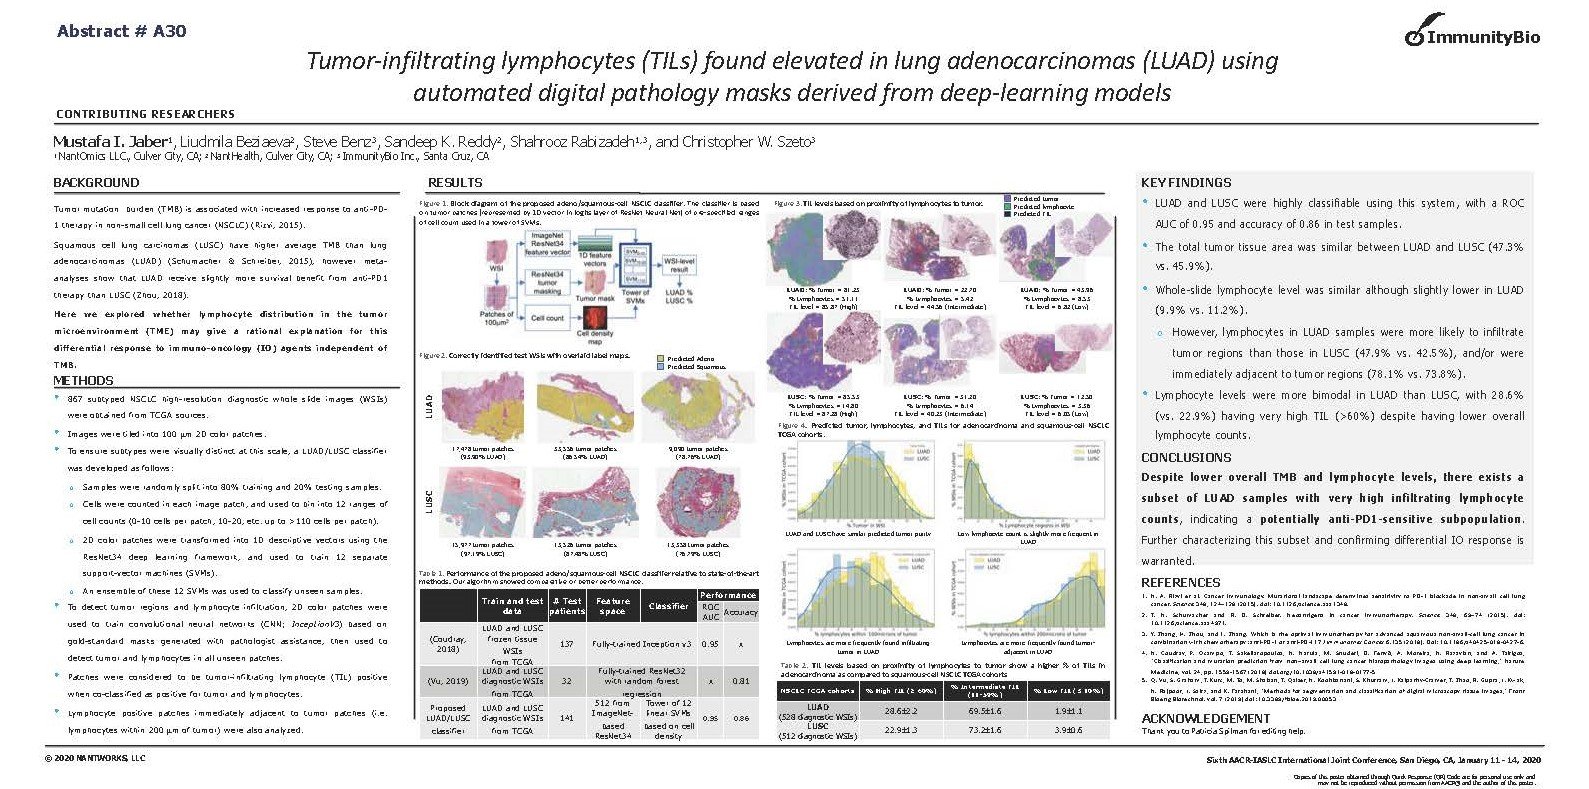 Jaber-AACR-IASLC-2020-poster-TILs-found-elevated-in-LUAD2